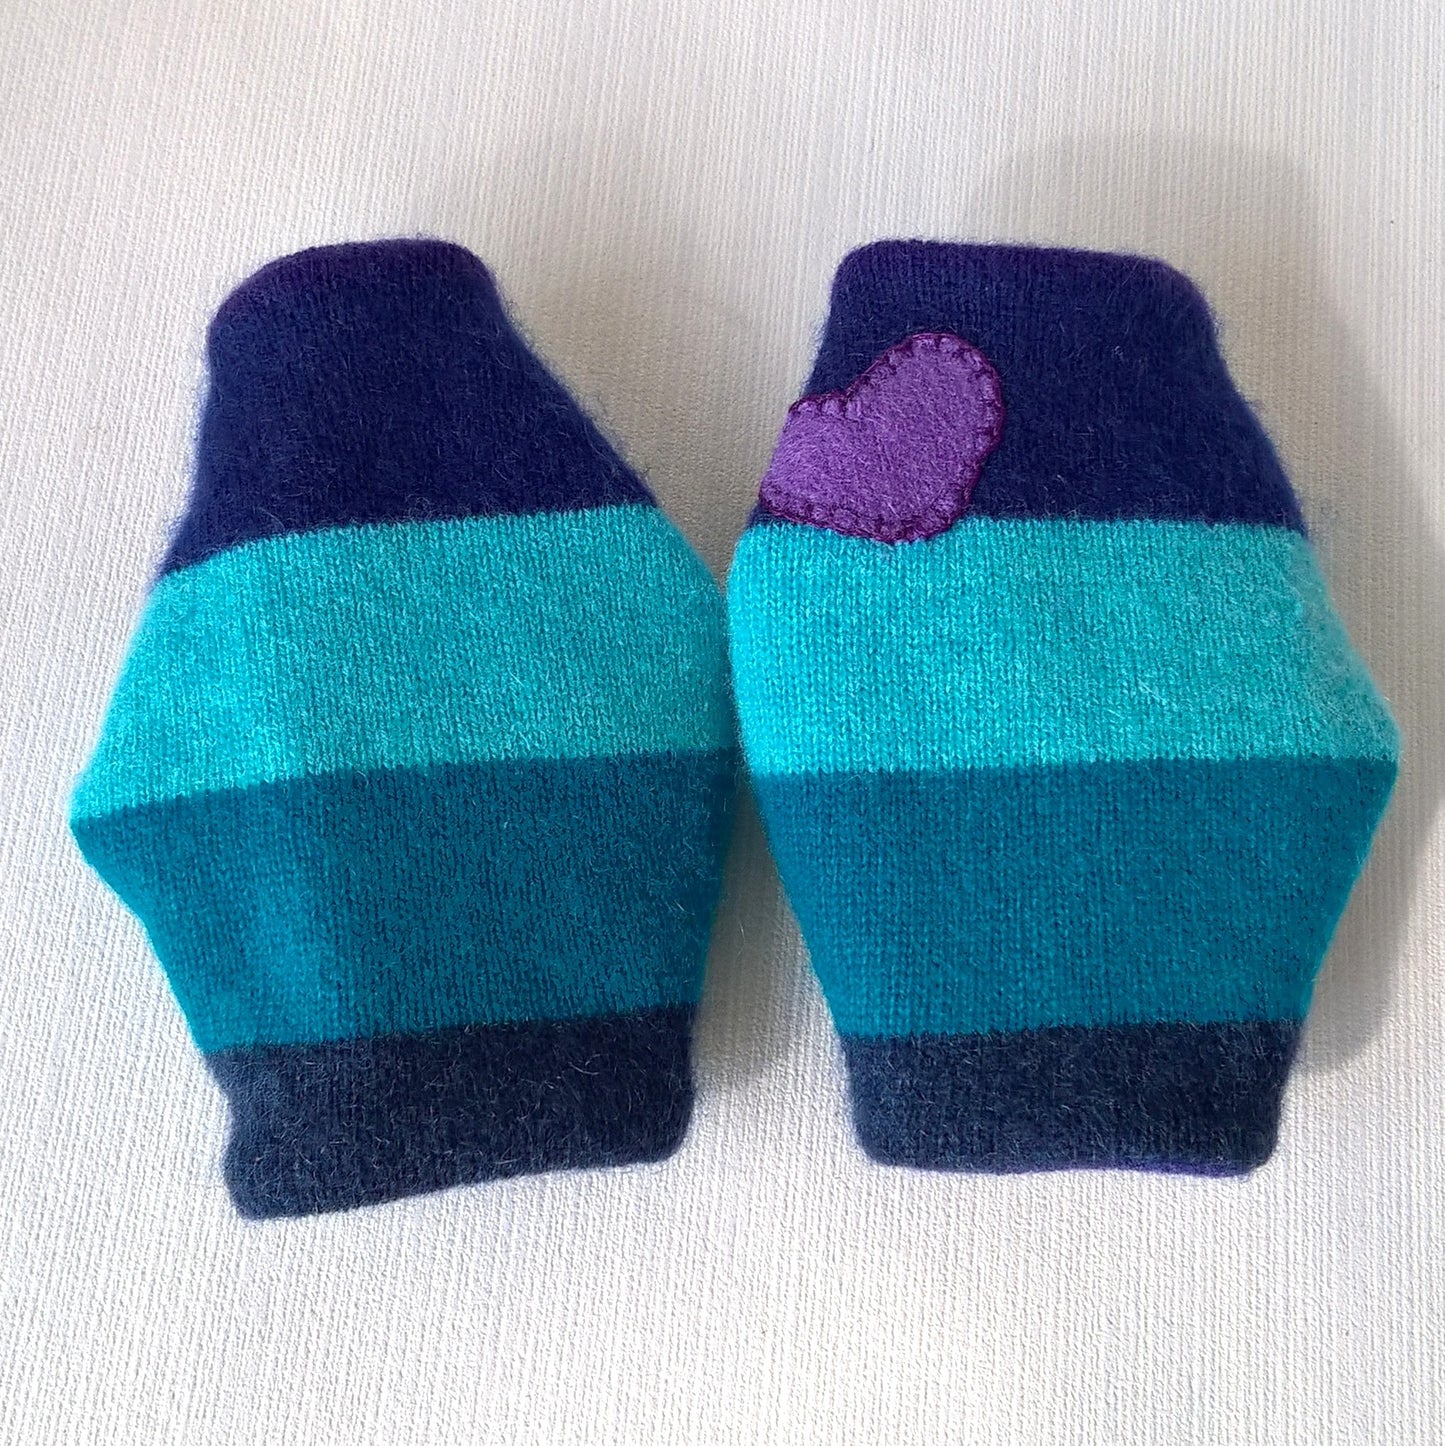 pure cashmere wrist warmers with applique heart